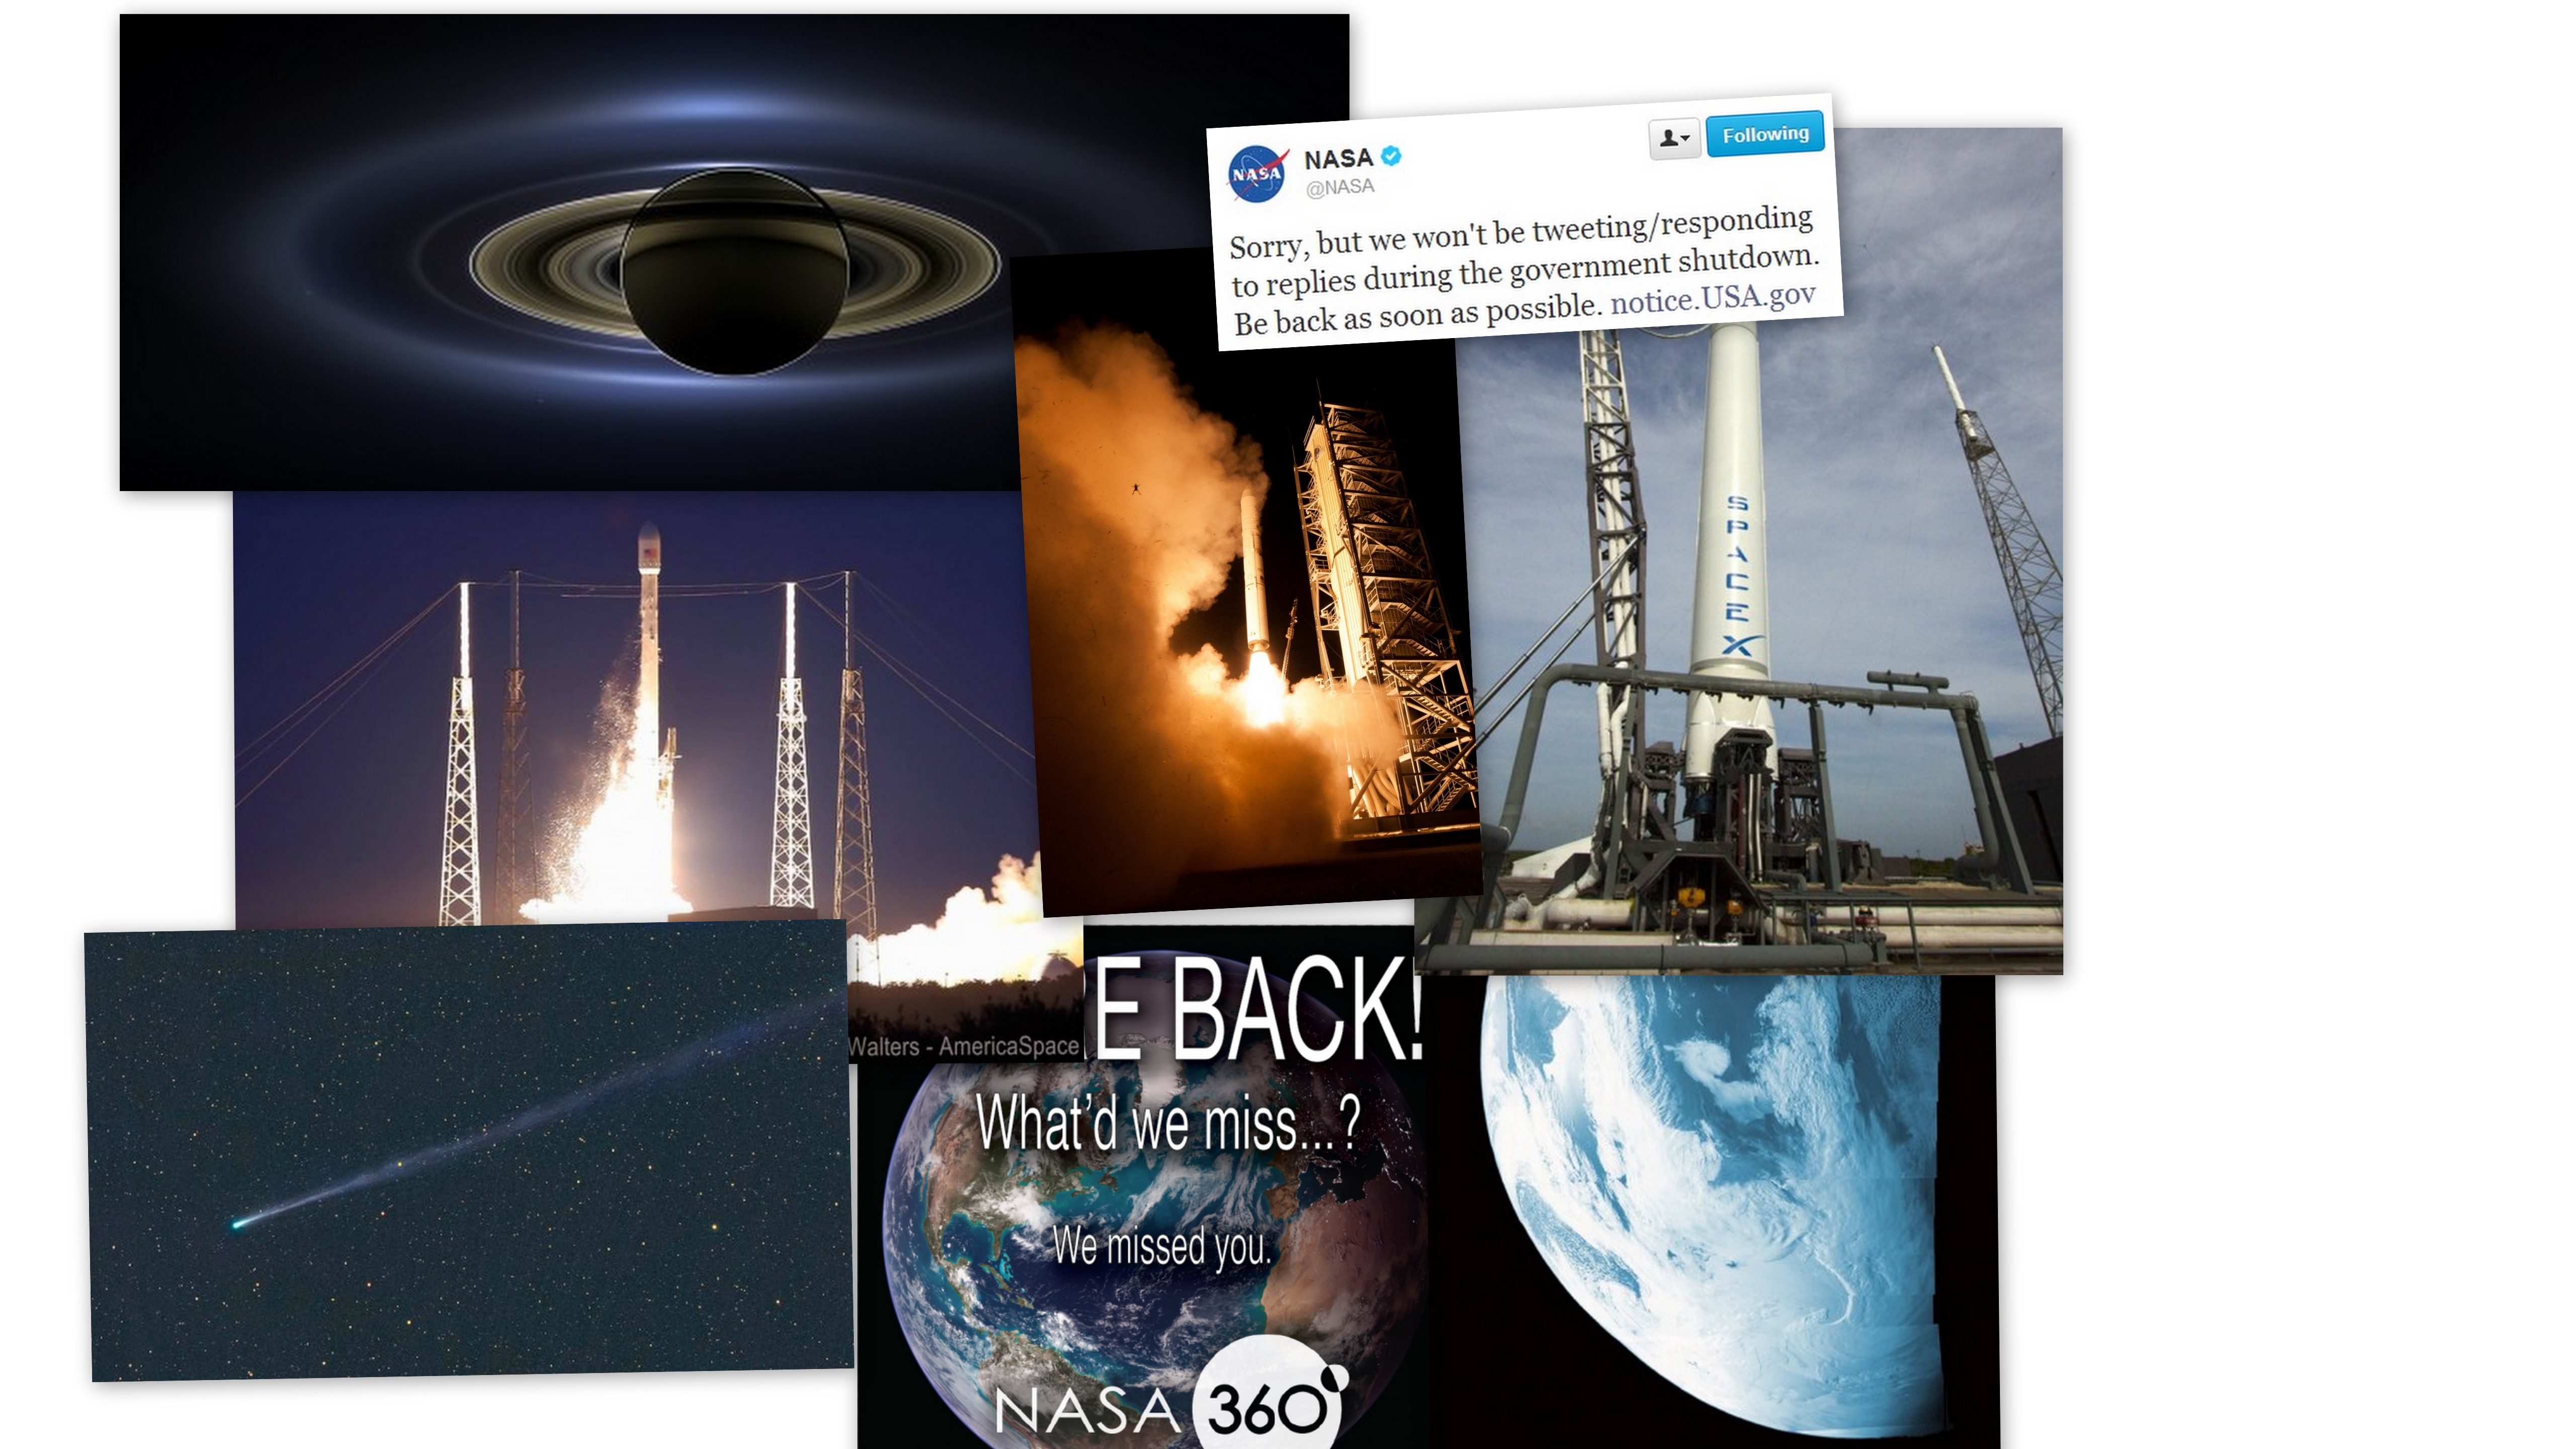 Shuttle/Shuttle Concept Restart: Fwd: Universe Today's Top 10 (or so) Stories of 20135120 x 2880